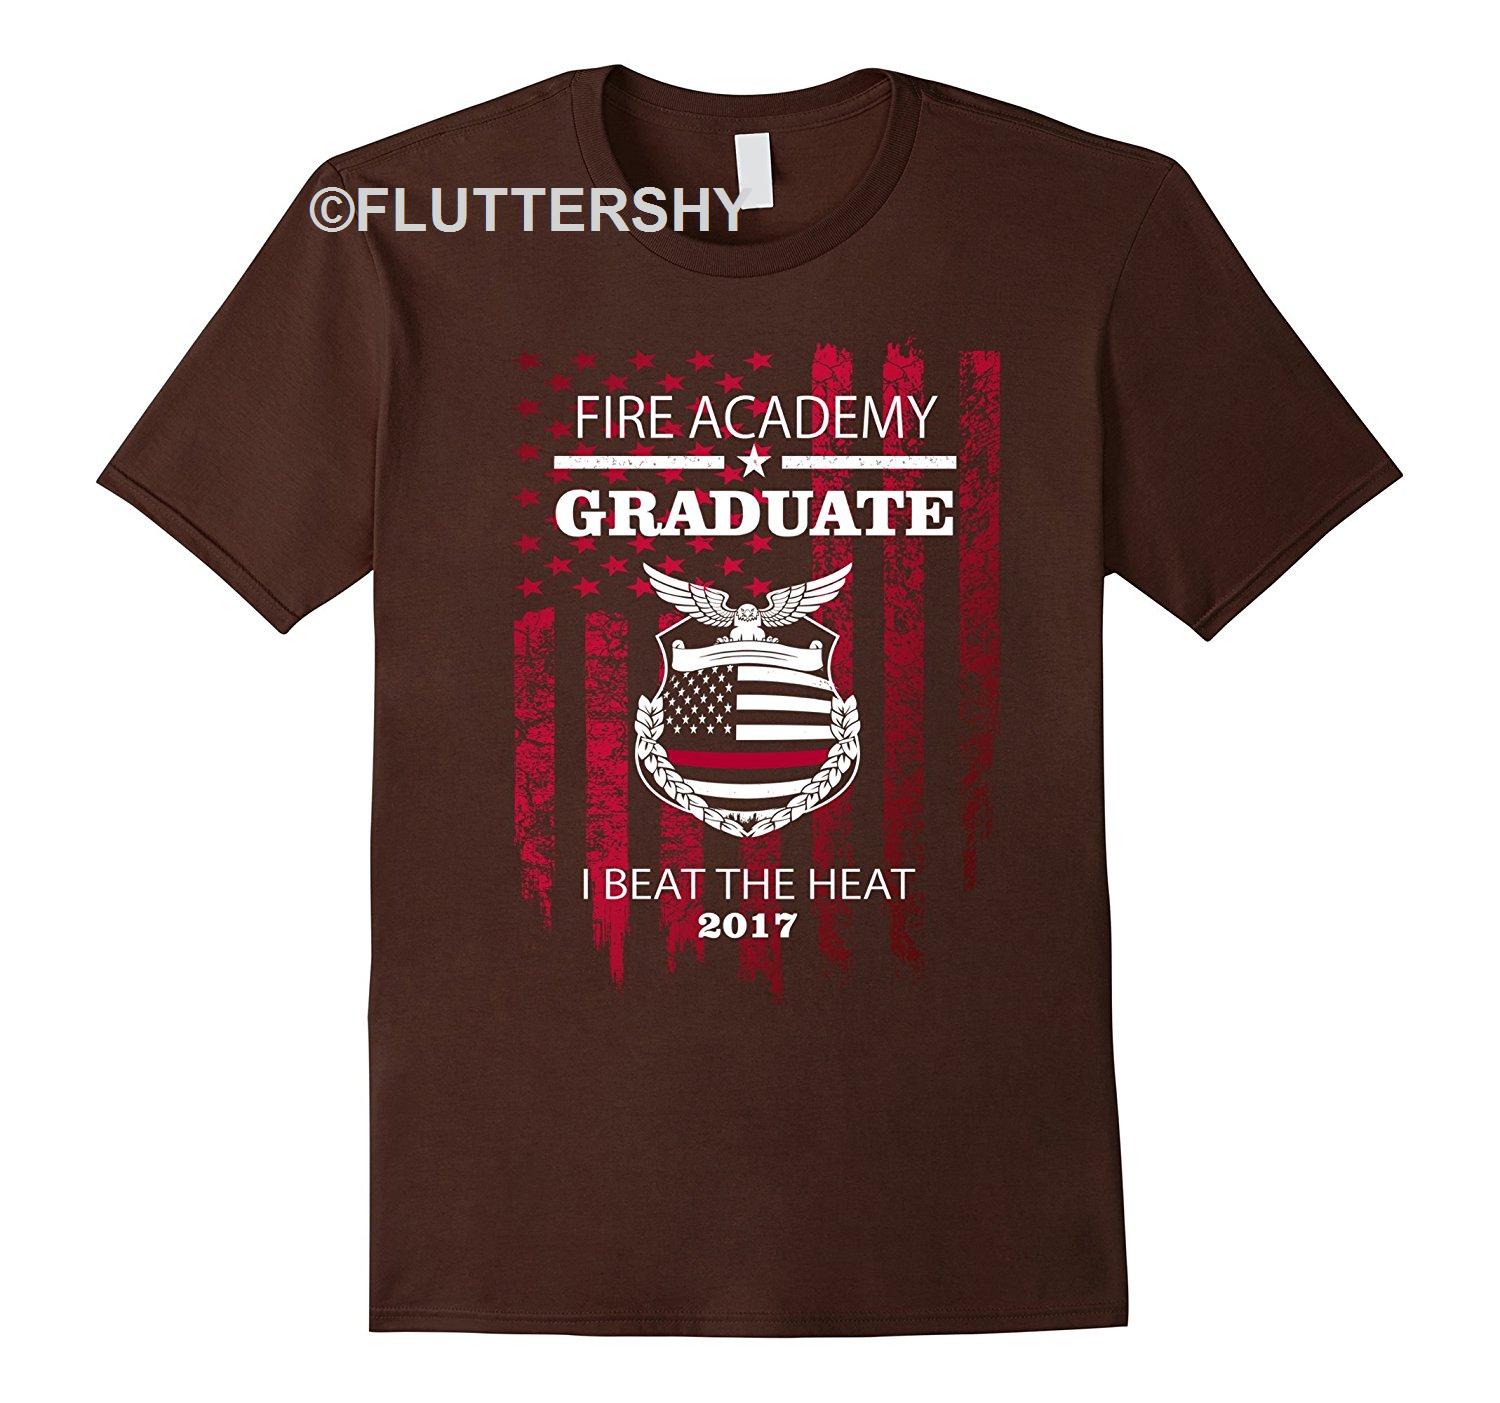 Trending Tees Shop From 1000 Unique Fire Academy Graduate - I Beat The Heat 2017 Shirts